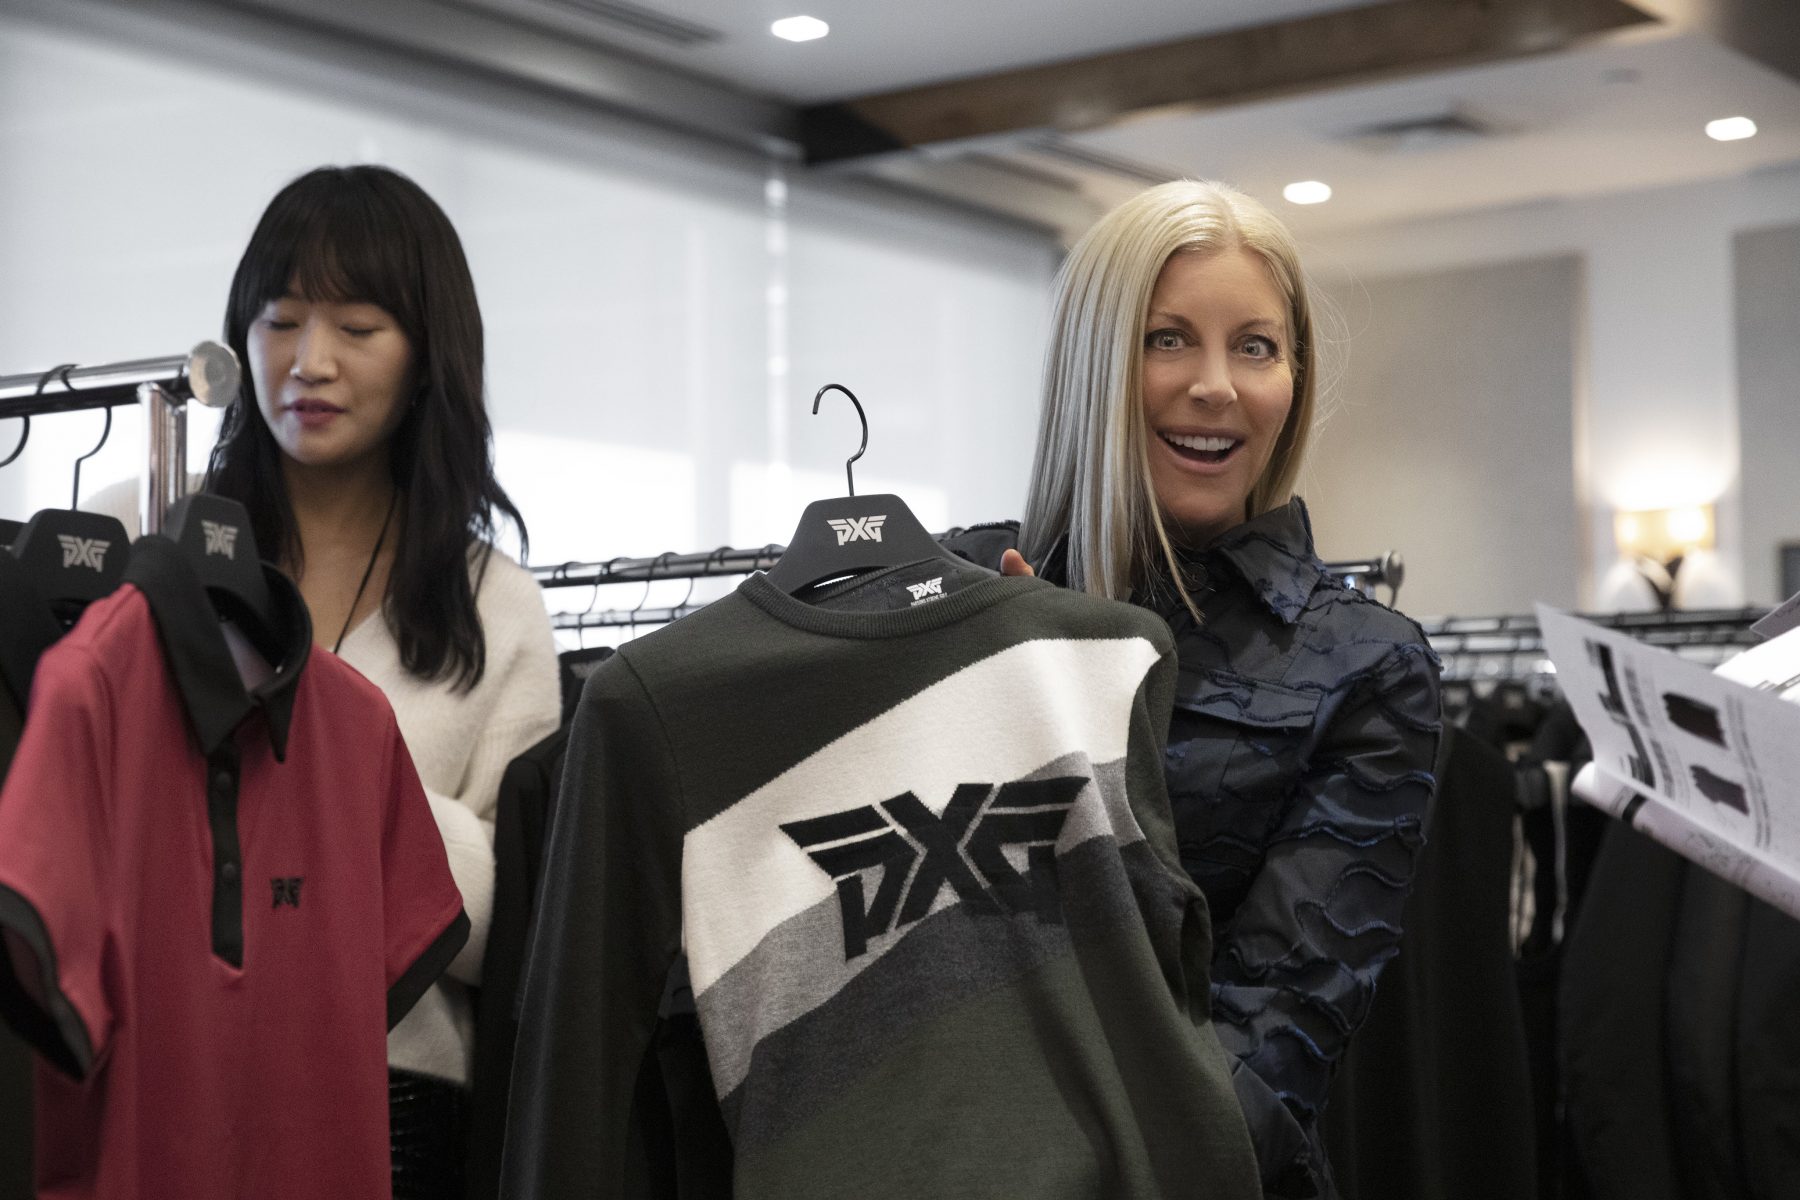 Renee Parsons holding PXG apparel